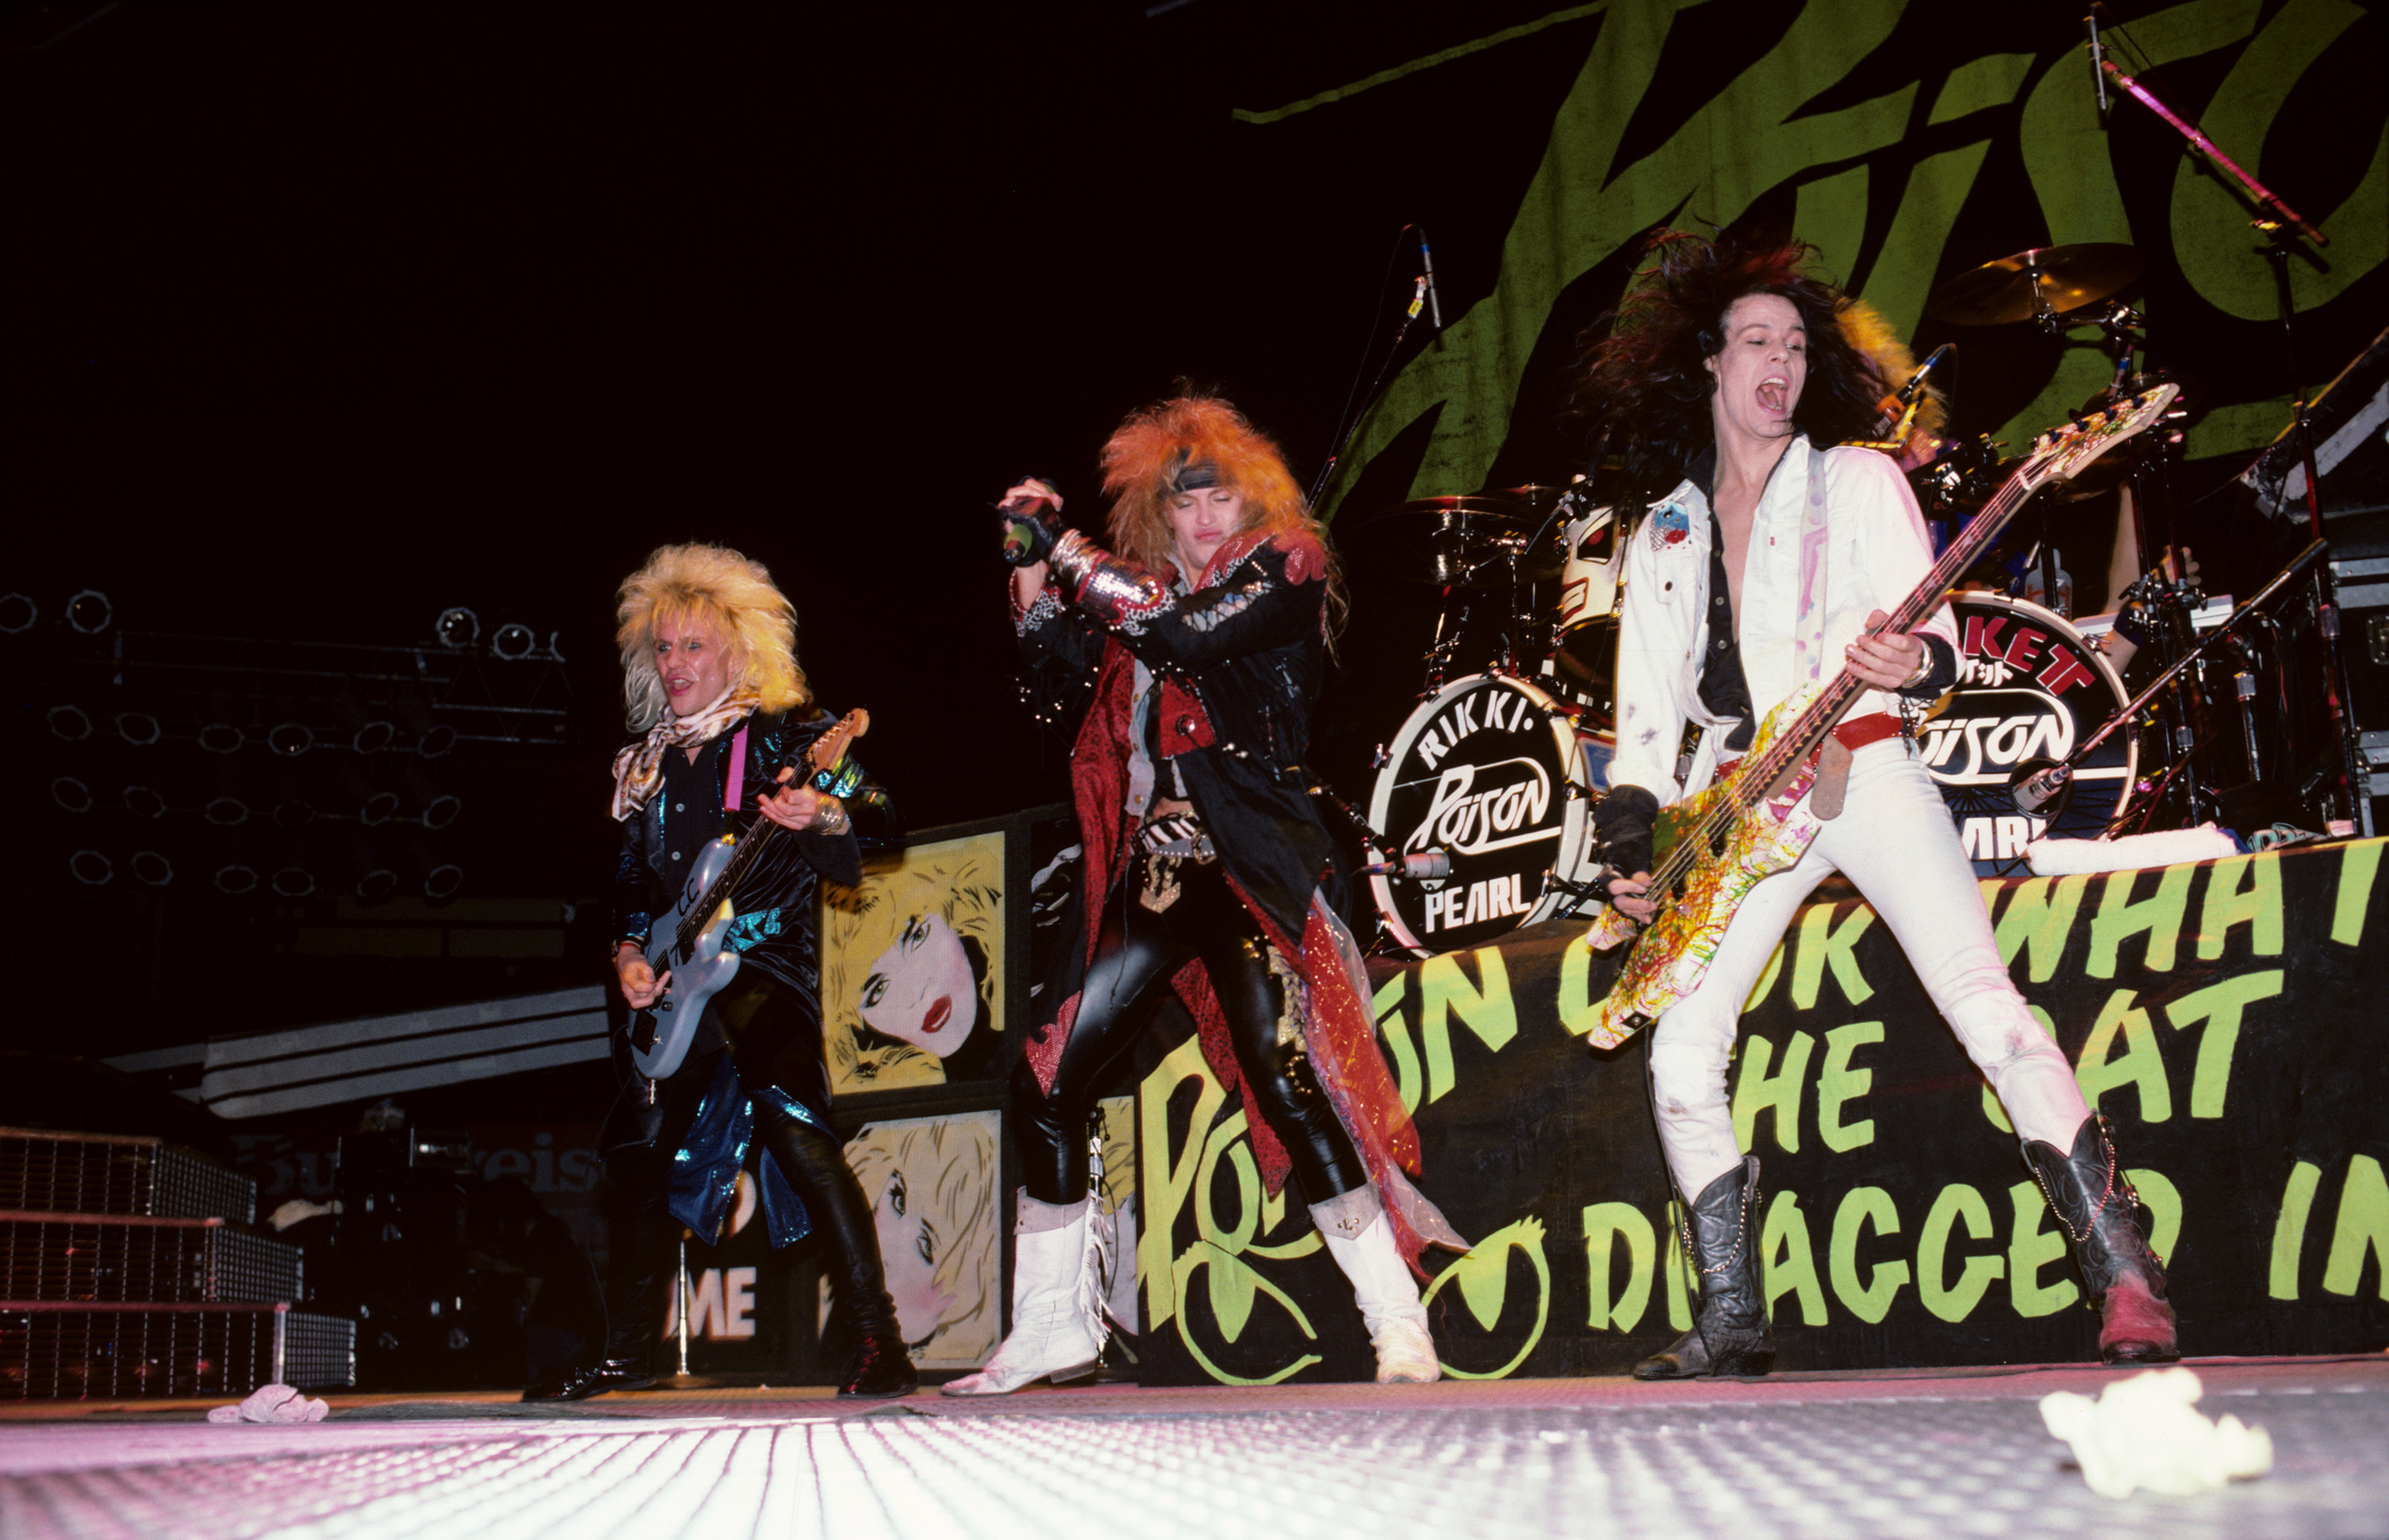 <p>Musically, Poison is far from the greatest hair metal band of all time, but when the genre is brought up, this should be the first group that comes to mind. Bret, Rikki, Bobby, and C.C. lived the hair metal life like nobody else. From the teased hair, makeup, clothes, and good times on stage and off, Poison was the <a href="https://www.youtube.com/watch?v=xCChxBSRo1Y" rel="noopener noreferrer">epitome of the hair metal scene</a>. The best part: The band never apologized for it. As bassist Bobby Dall said during an episode of VH1's <em>Behind The Music</em>, "I never aspired to be a musician. I wanted to be a rock and roll star, and that's what I became." And fans can still catch Poison on the road today, having <a href="https://www.youtube.com/watch?v=_88L-CU7PD4" rel="noopener noreferrer">"Nothin' but a Good Time.<span>"</span></a>  </p><p><a href='https://www.msn.com/en-us/community/channel/vid-cj9pqbr0vn9in2b6ddcd8sfgpfq6x6utp44fssrv6mc2gtybw0us'>Did you enjoy this slideshow? Follow us on MSN to see more of our exclusive entertainment content.</a></p>